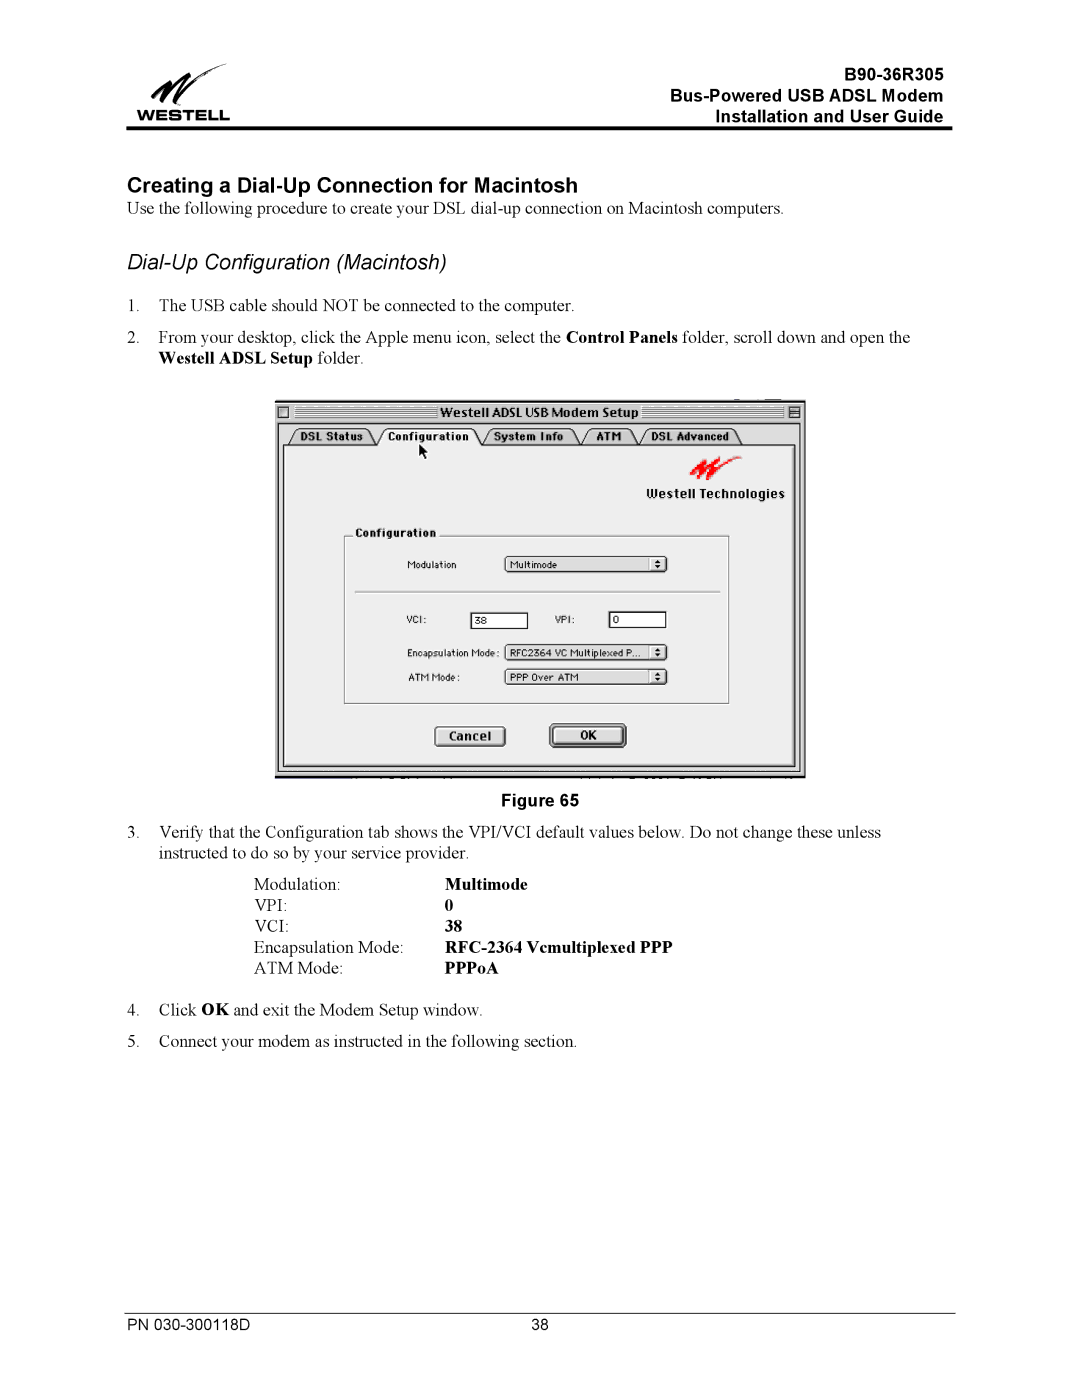 Westell Technologies B90-36R305 manual Creating a Dial-Up Connection for Macintosh, Dial-Up Configuration Macintosh 